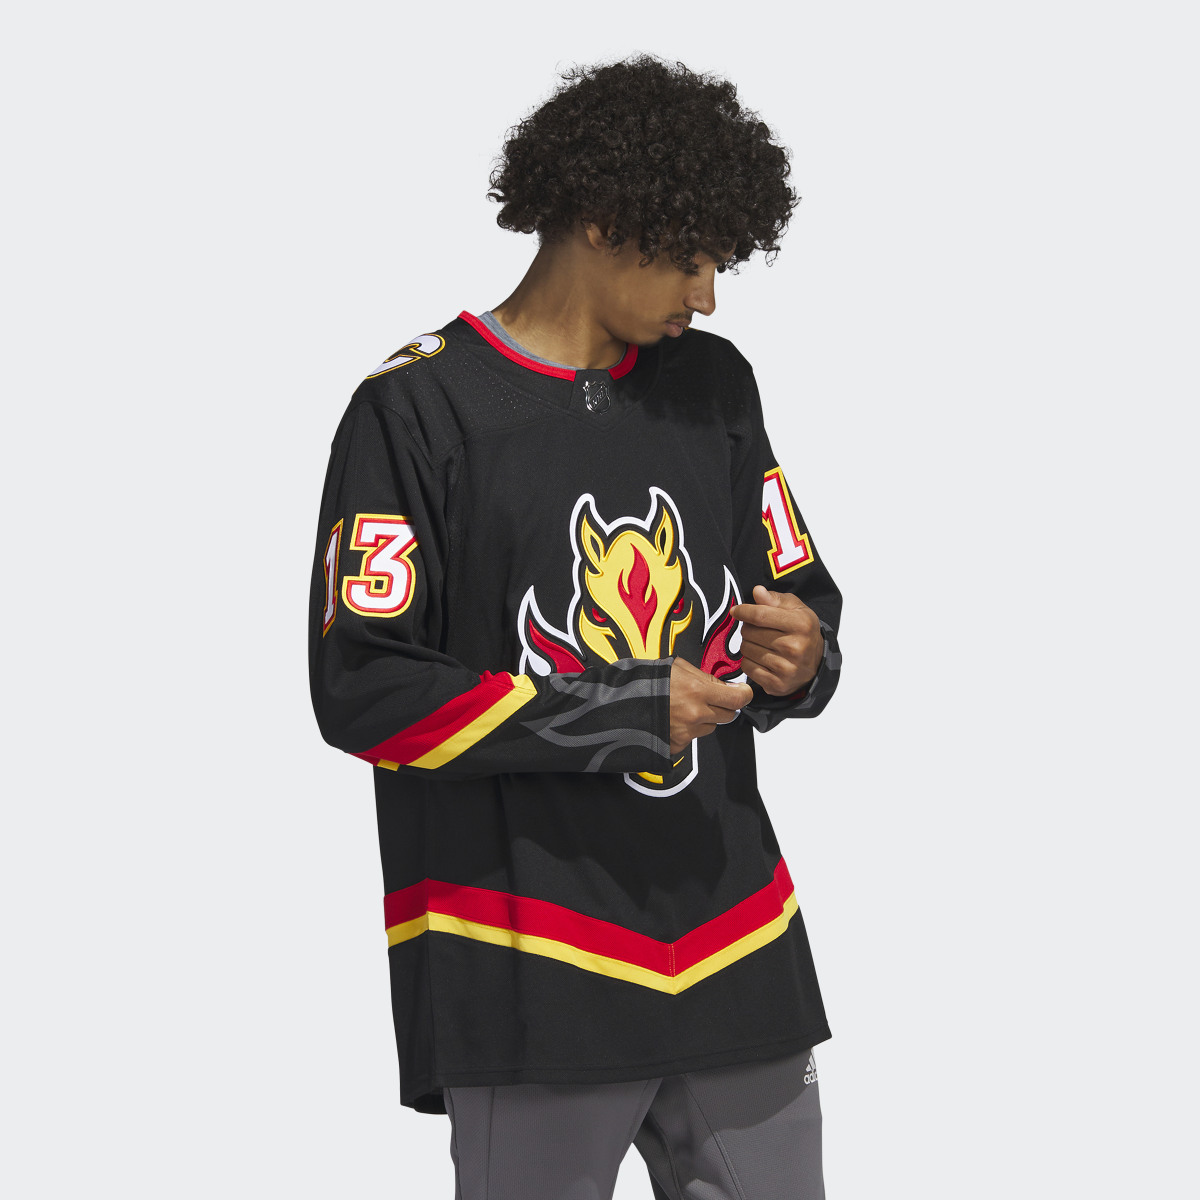 Adidas Flames Gaudreau Third Authentic Jersey. 4